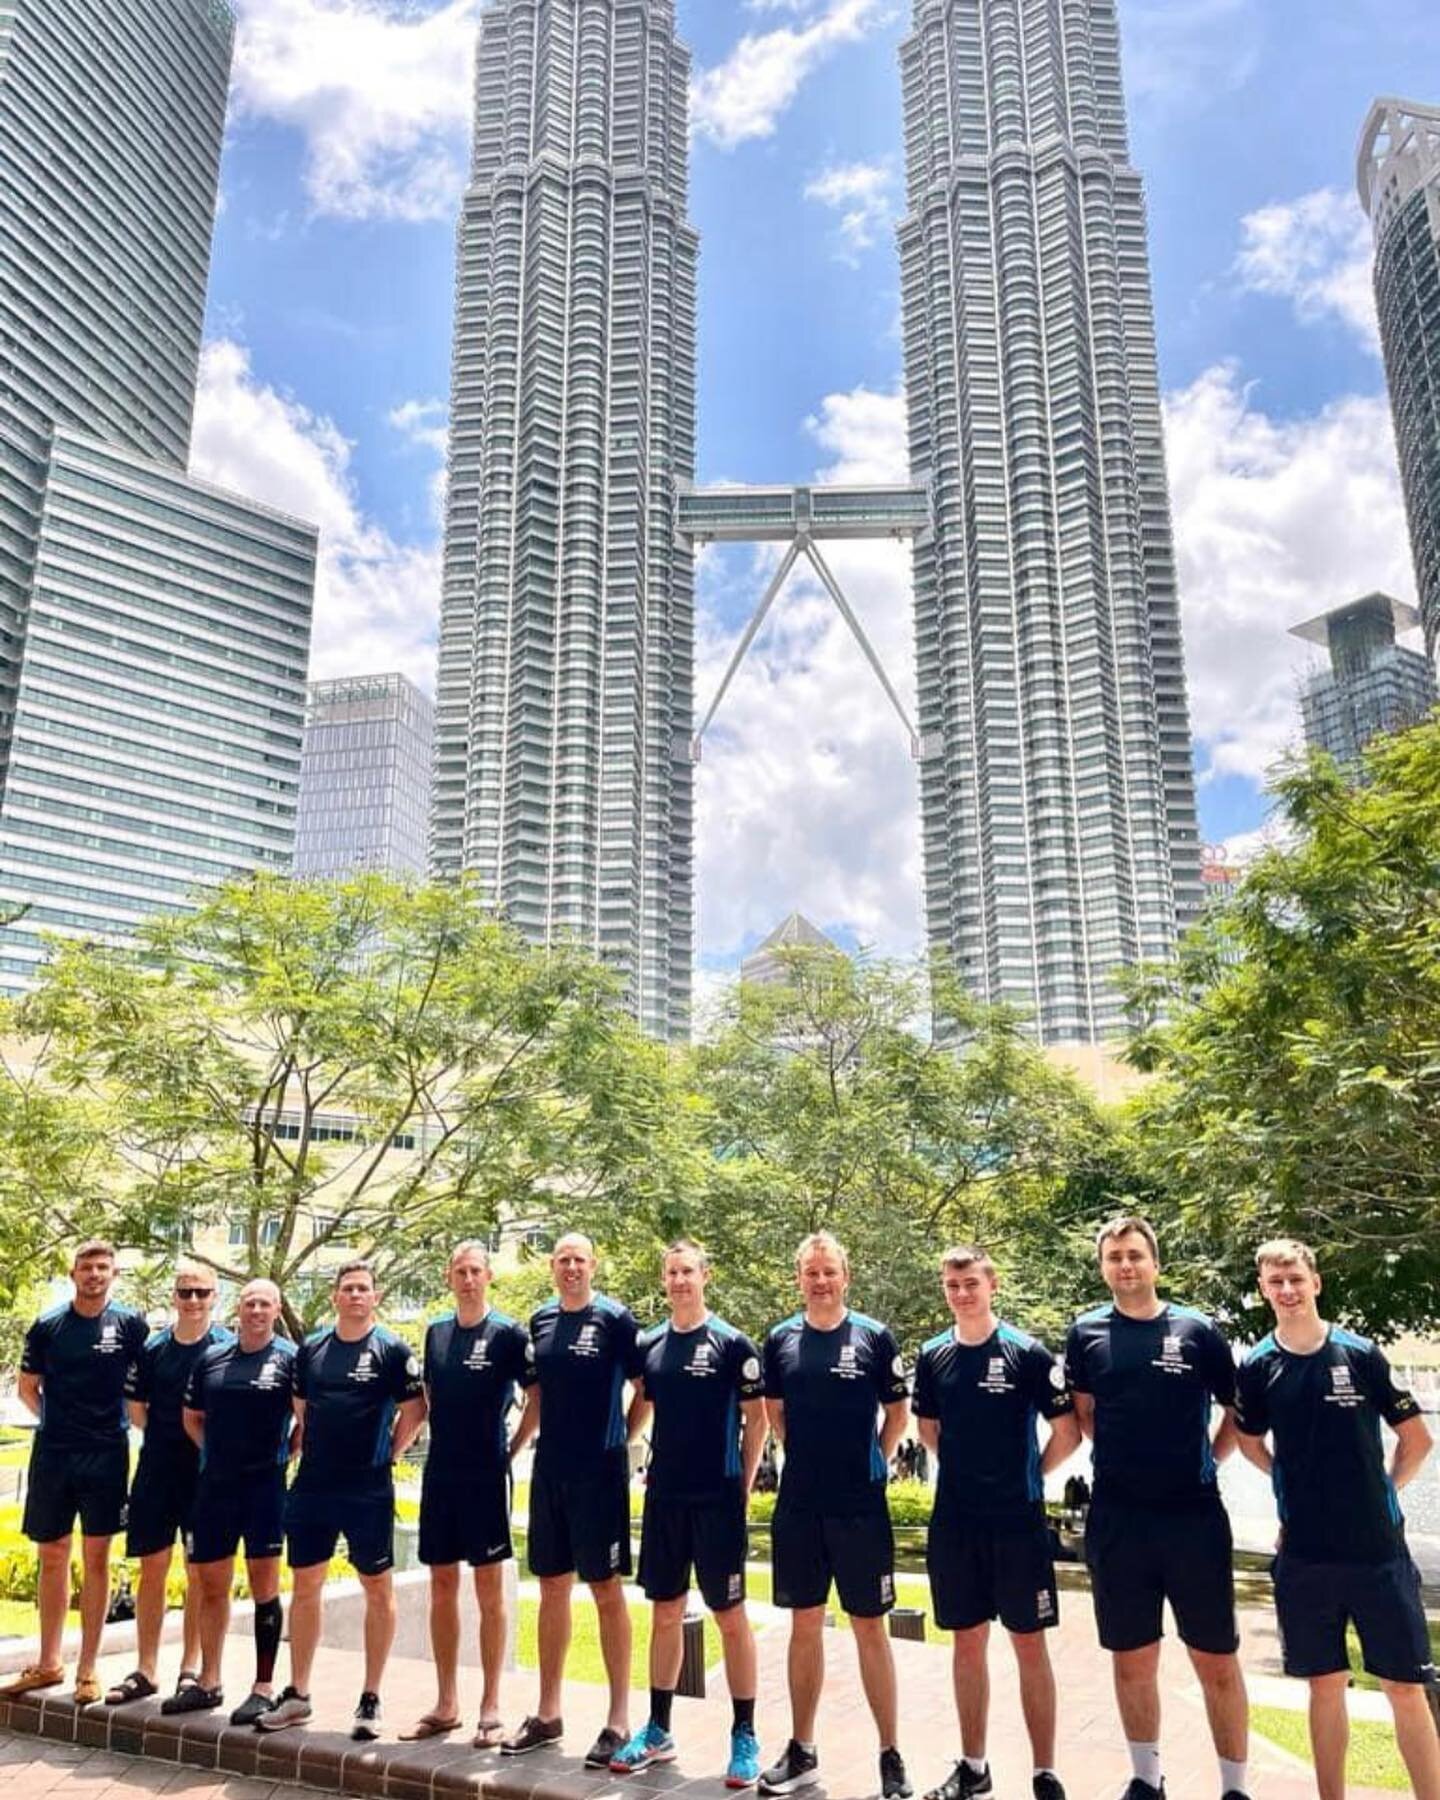 📣📢📣We have a very exciting announcement to make&hellip;.🥳🥳 We can now officially let you know that we are a proud sponsor for @royalnavy Squash team ! 
They are currently out on tour in Maylasia and Indonesia playing 6 international teams 🌎

It